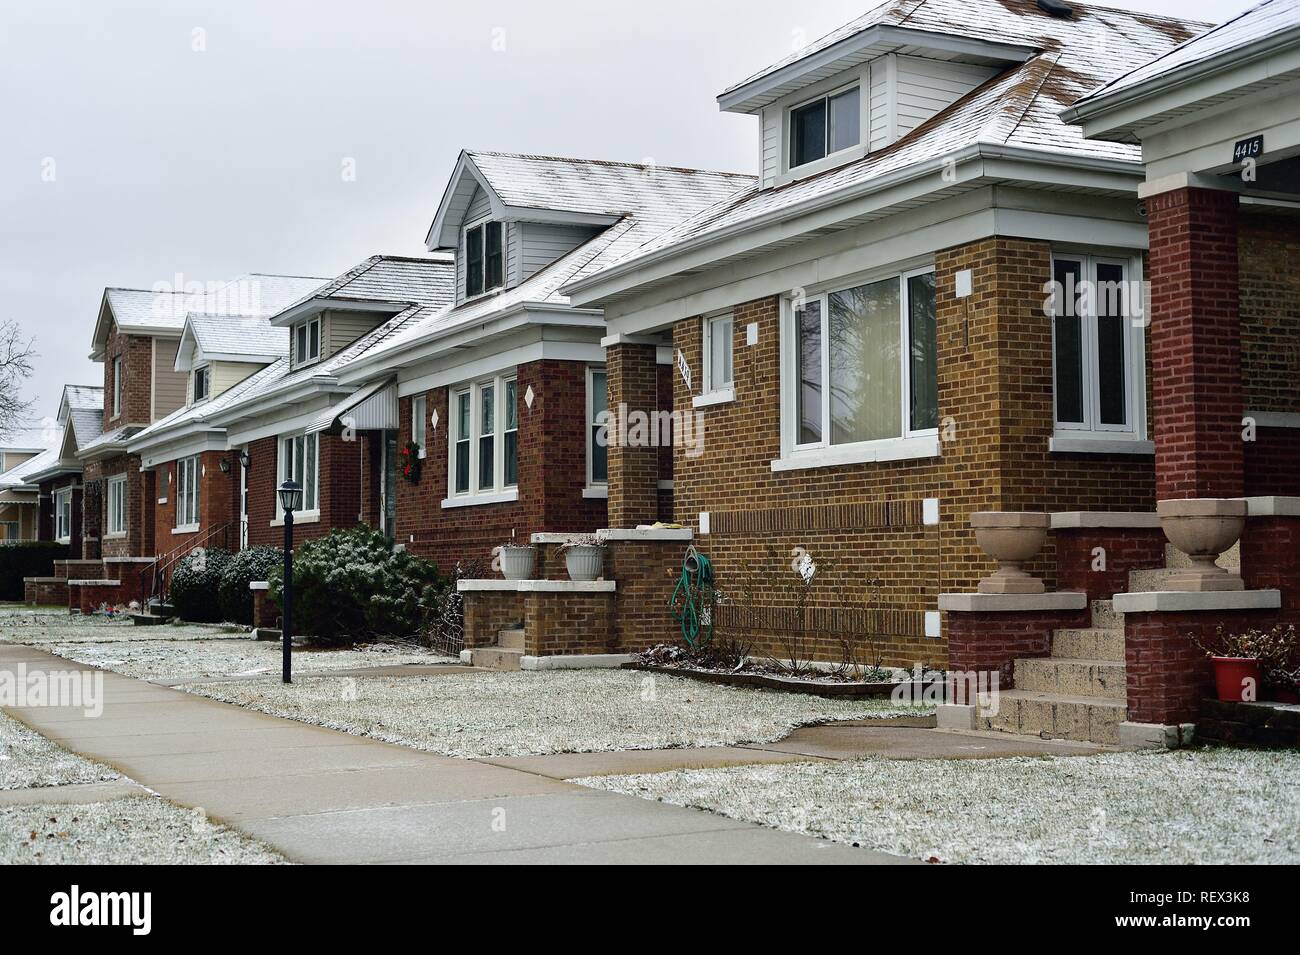 Chicago, Illinois, USA. A block of bungalow-styled homes typical and found thoroughout city neighborhoods. Stock Photo